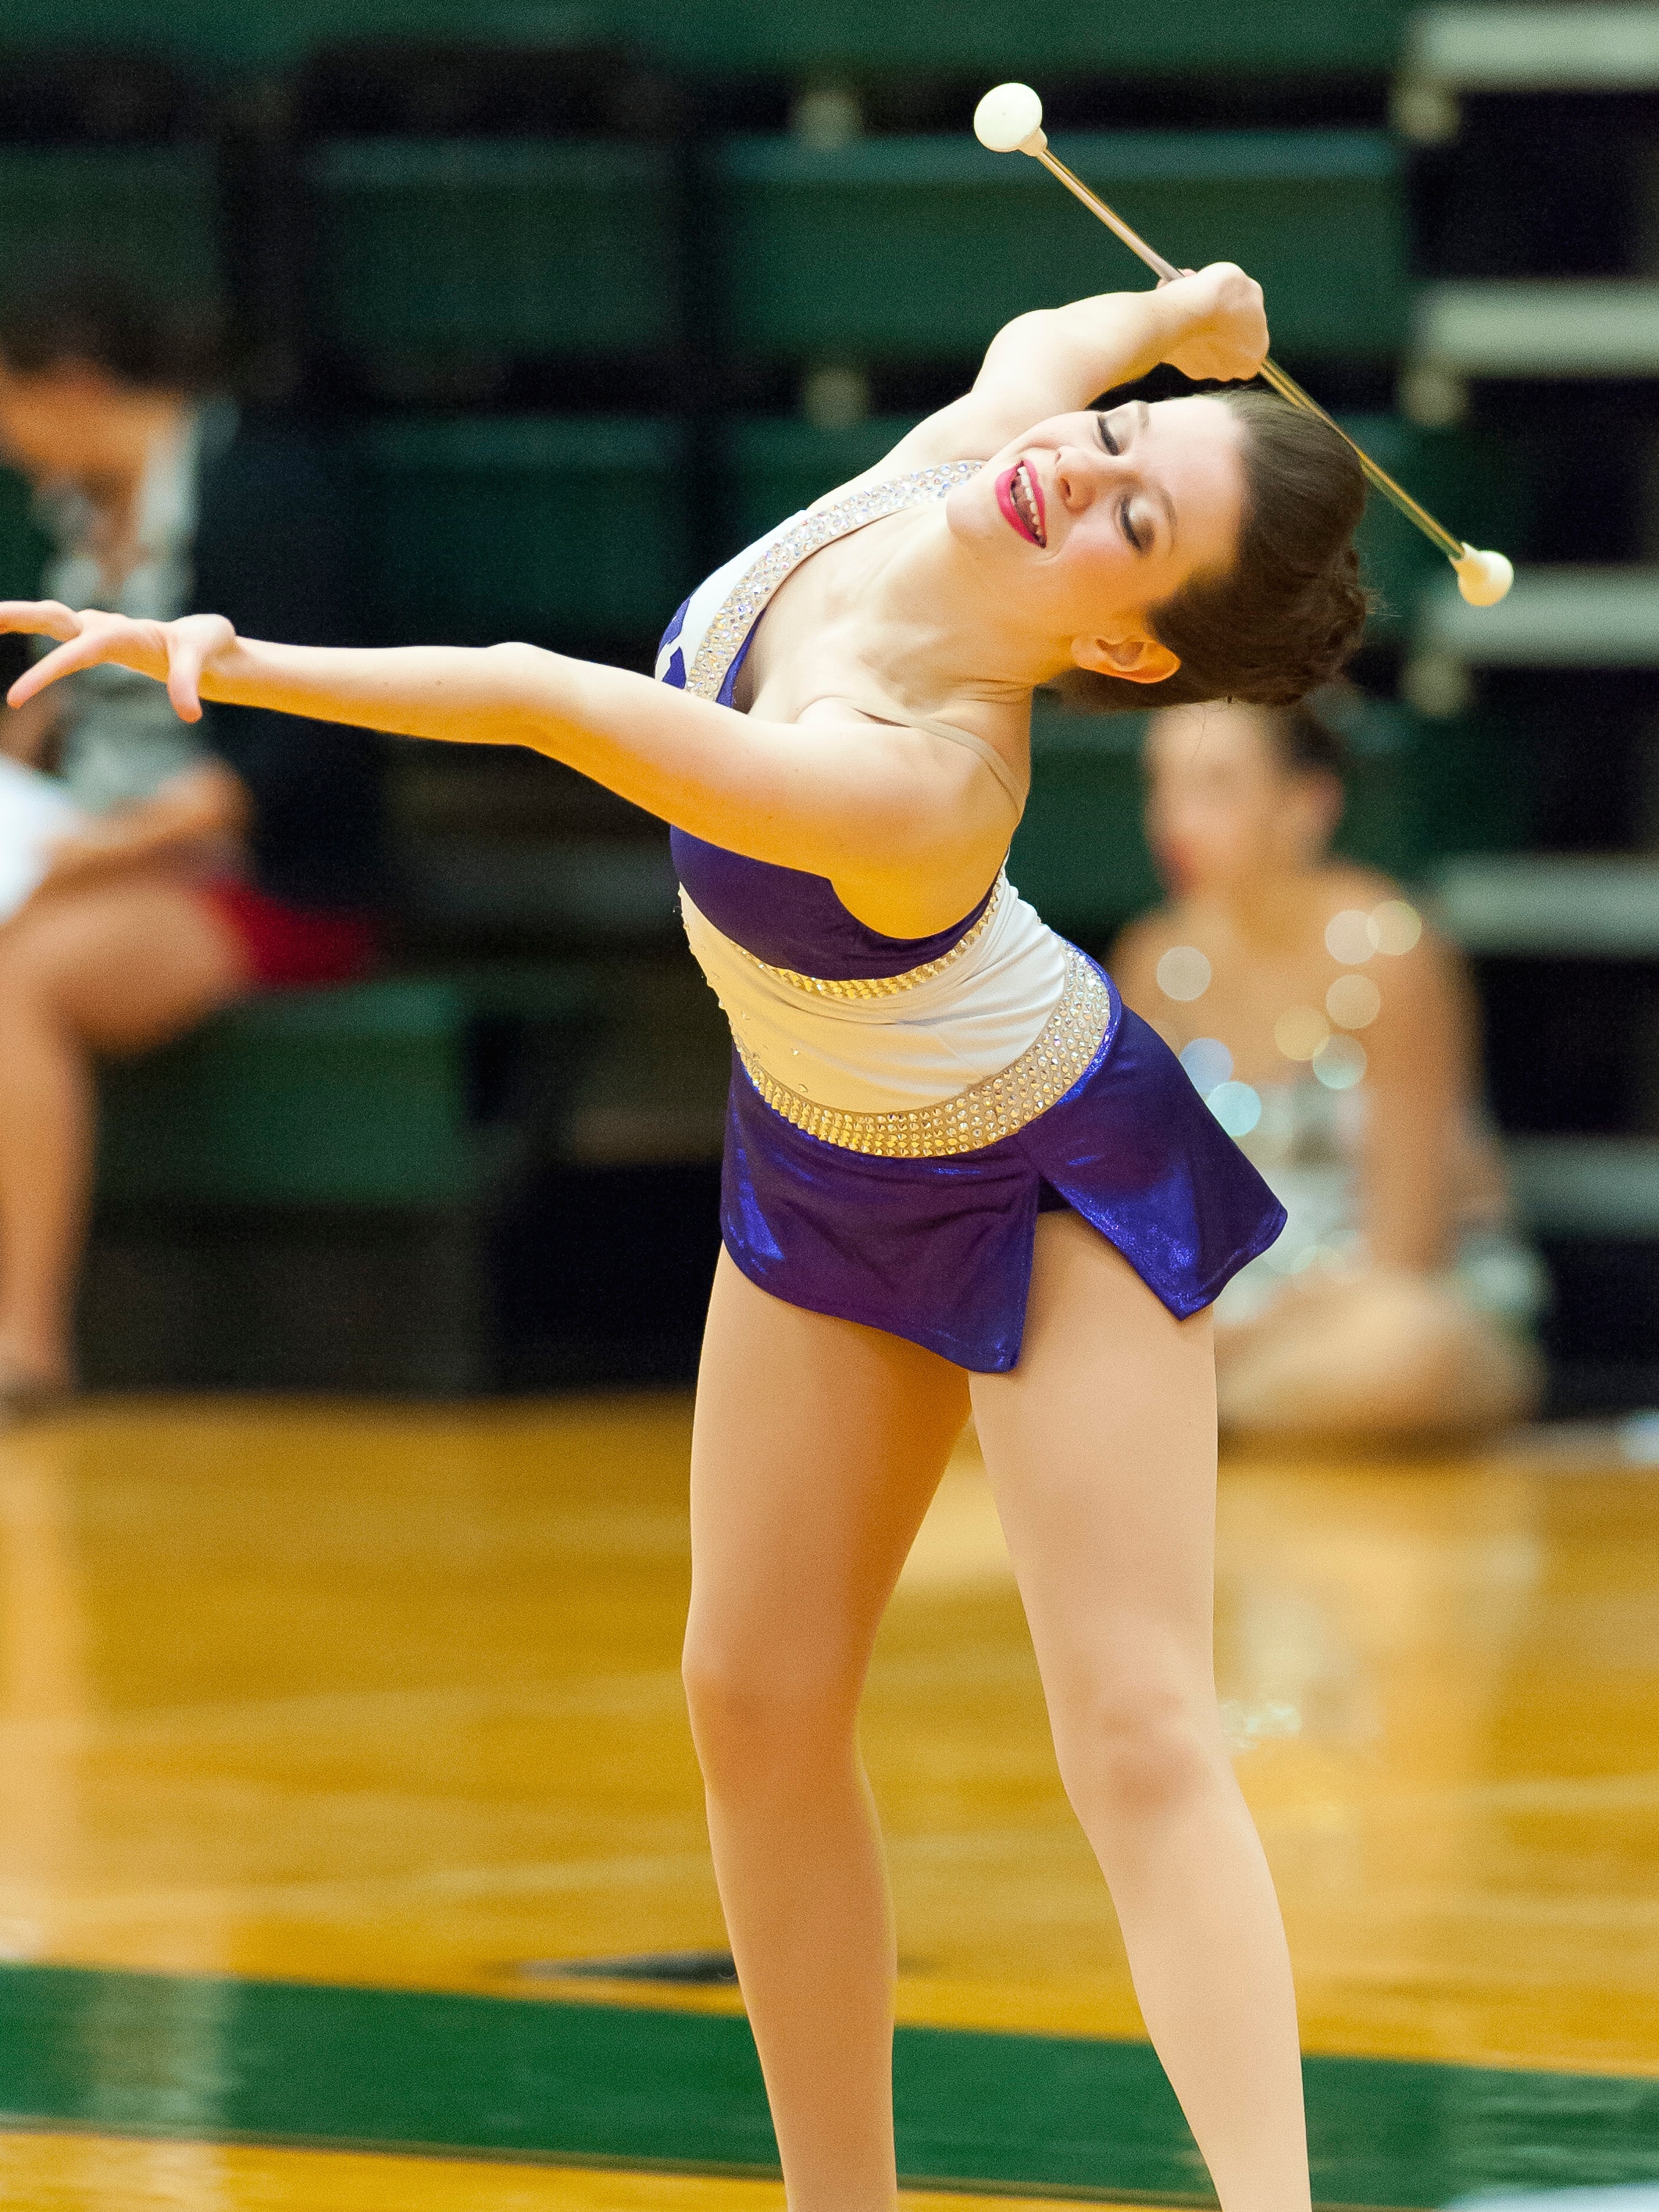 The 2013-2014 TCU Feature Twirler, Kristin Baker, performs her 2-Baton routine at the 2013 Texas State Miss Majorette and Twirling Champions held in Boerne, Texas.